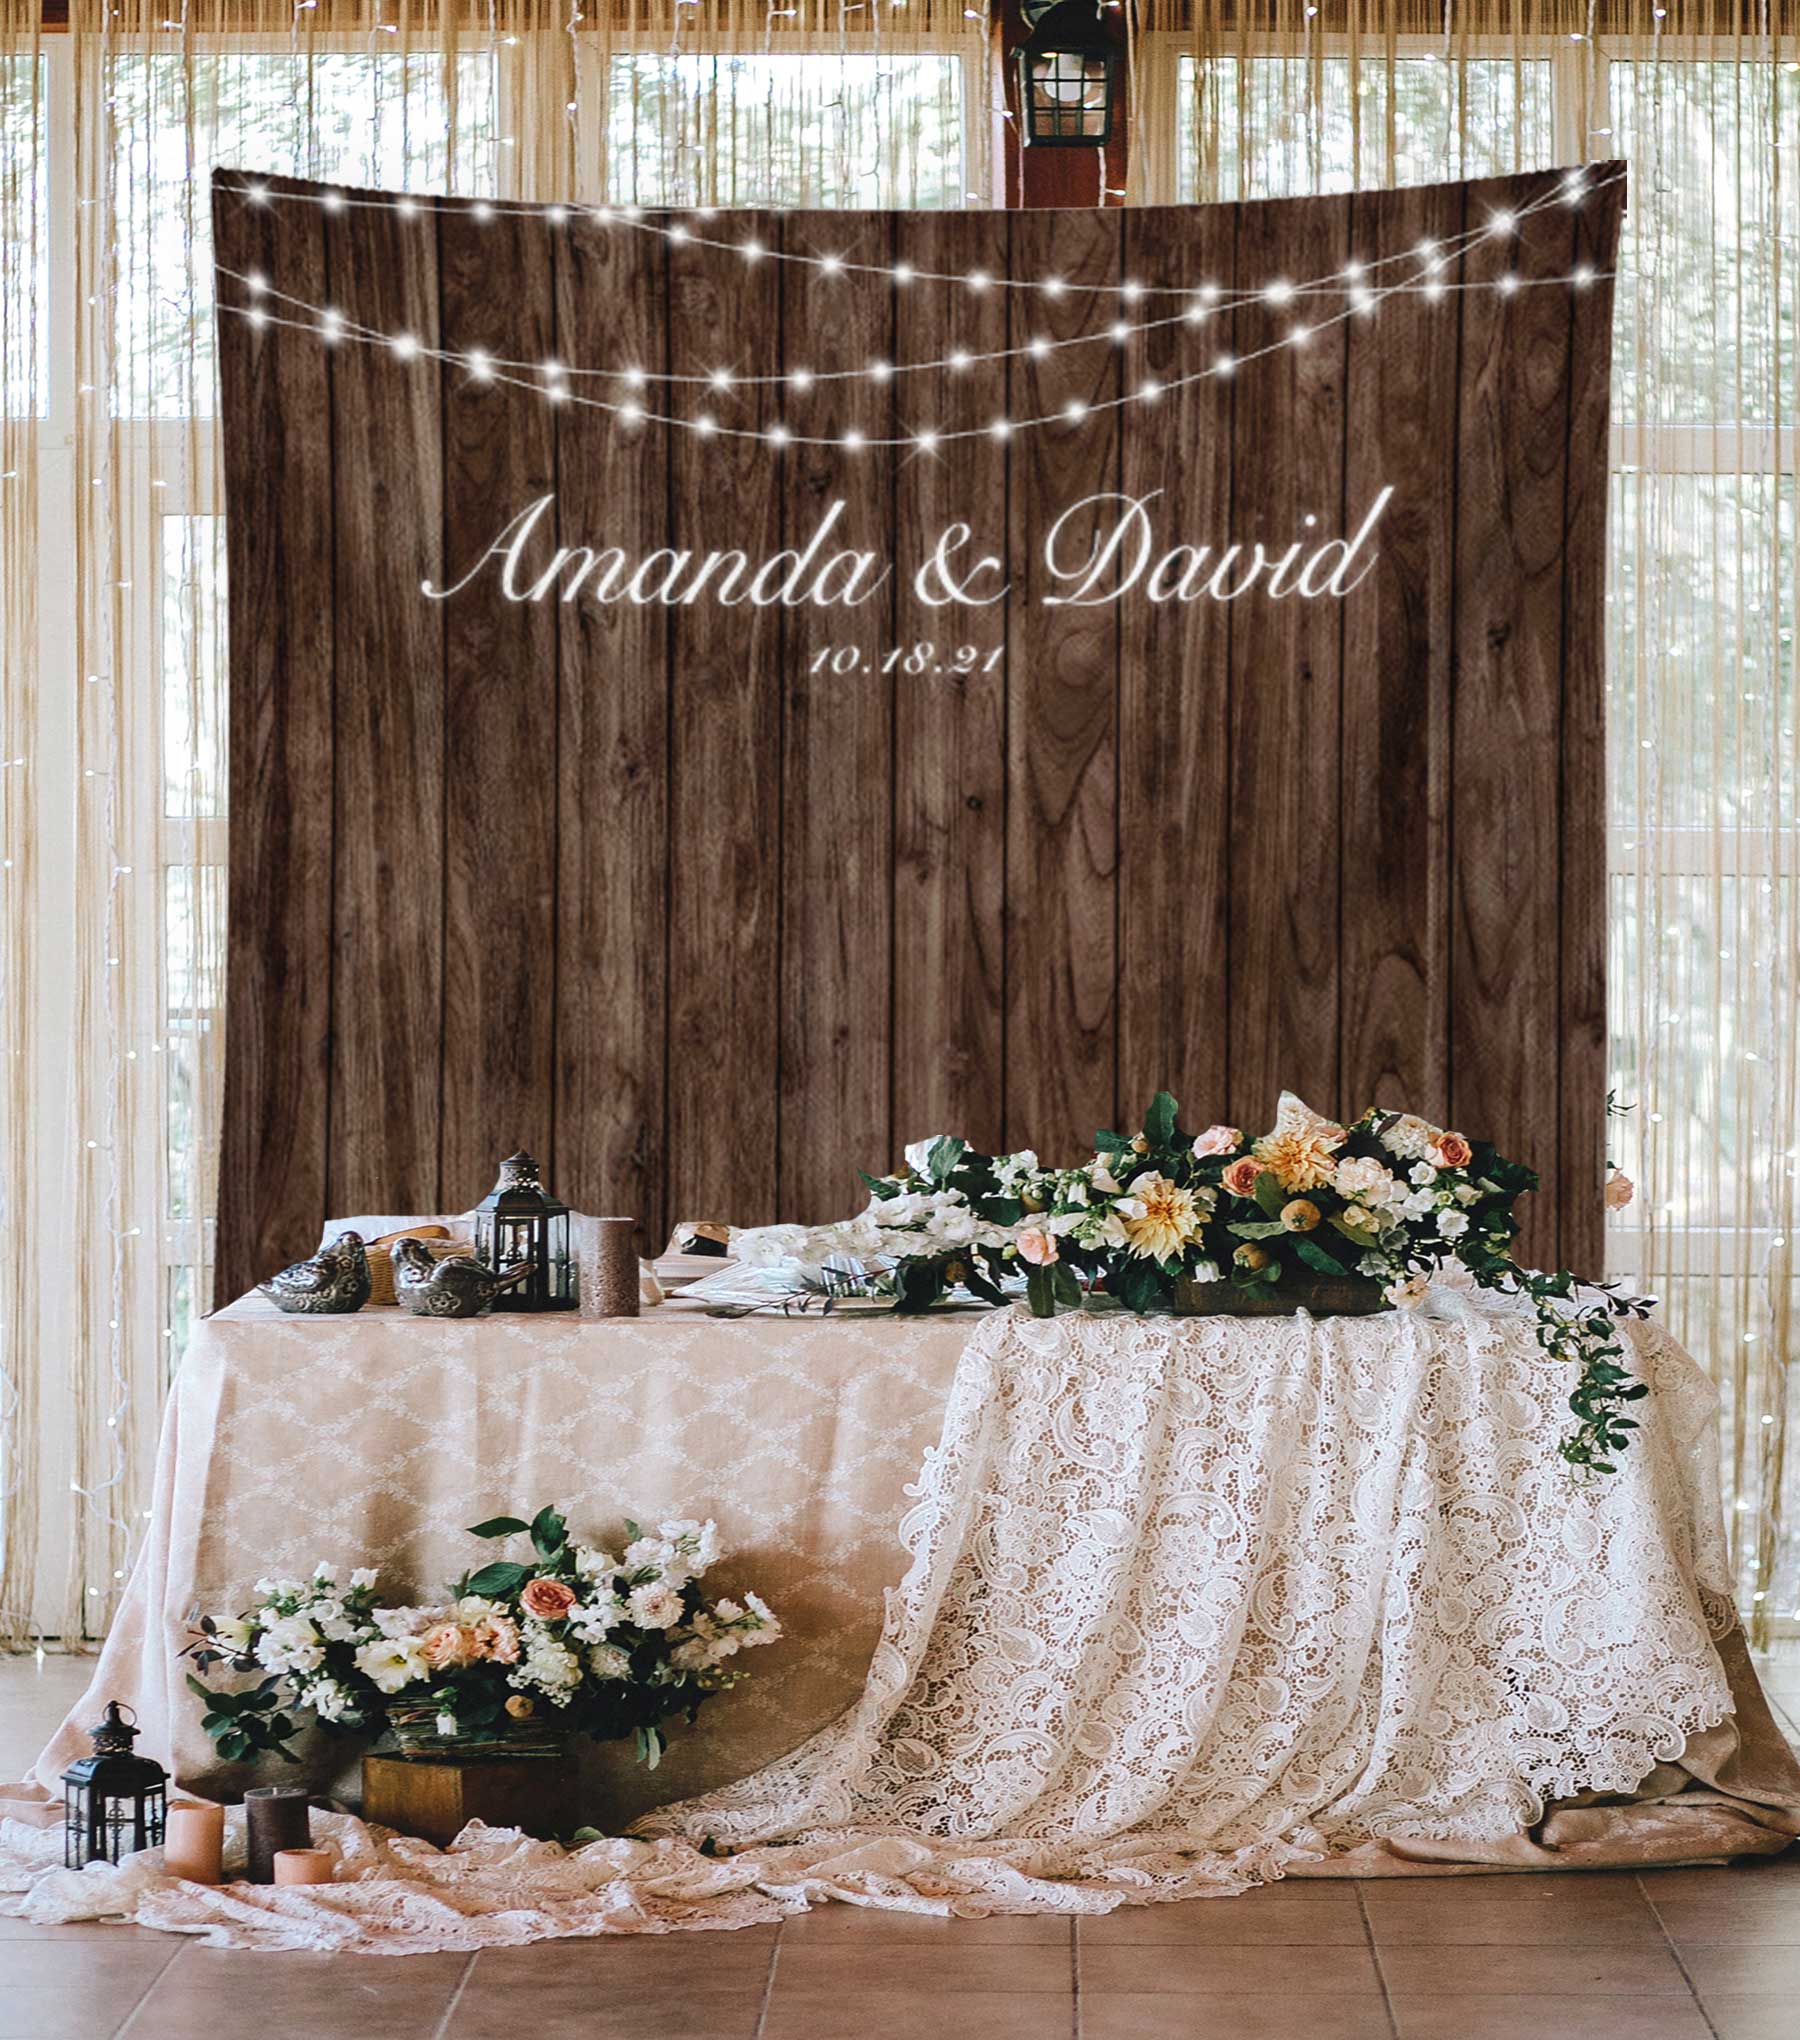 Stunning 300+ Backdrop Wedding Rustic Ideas and Designs